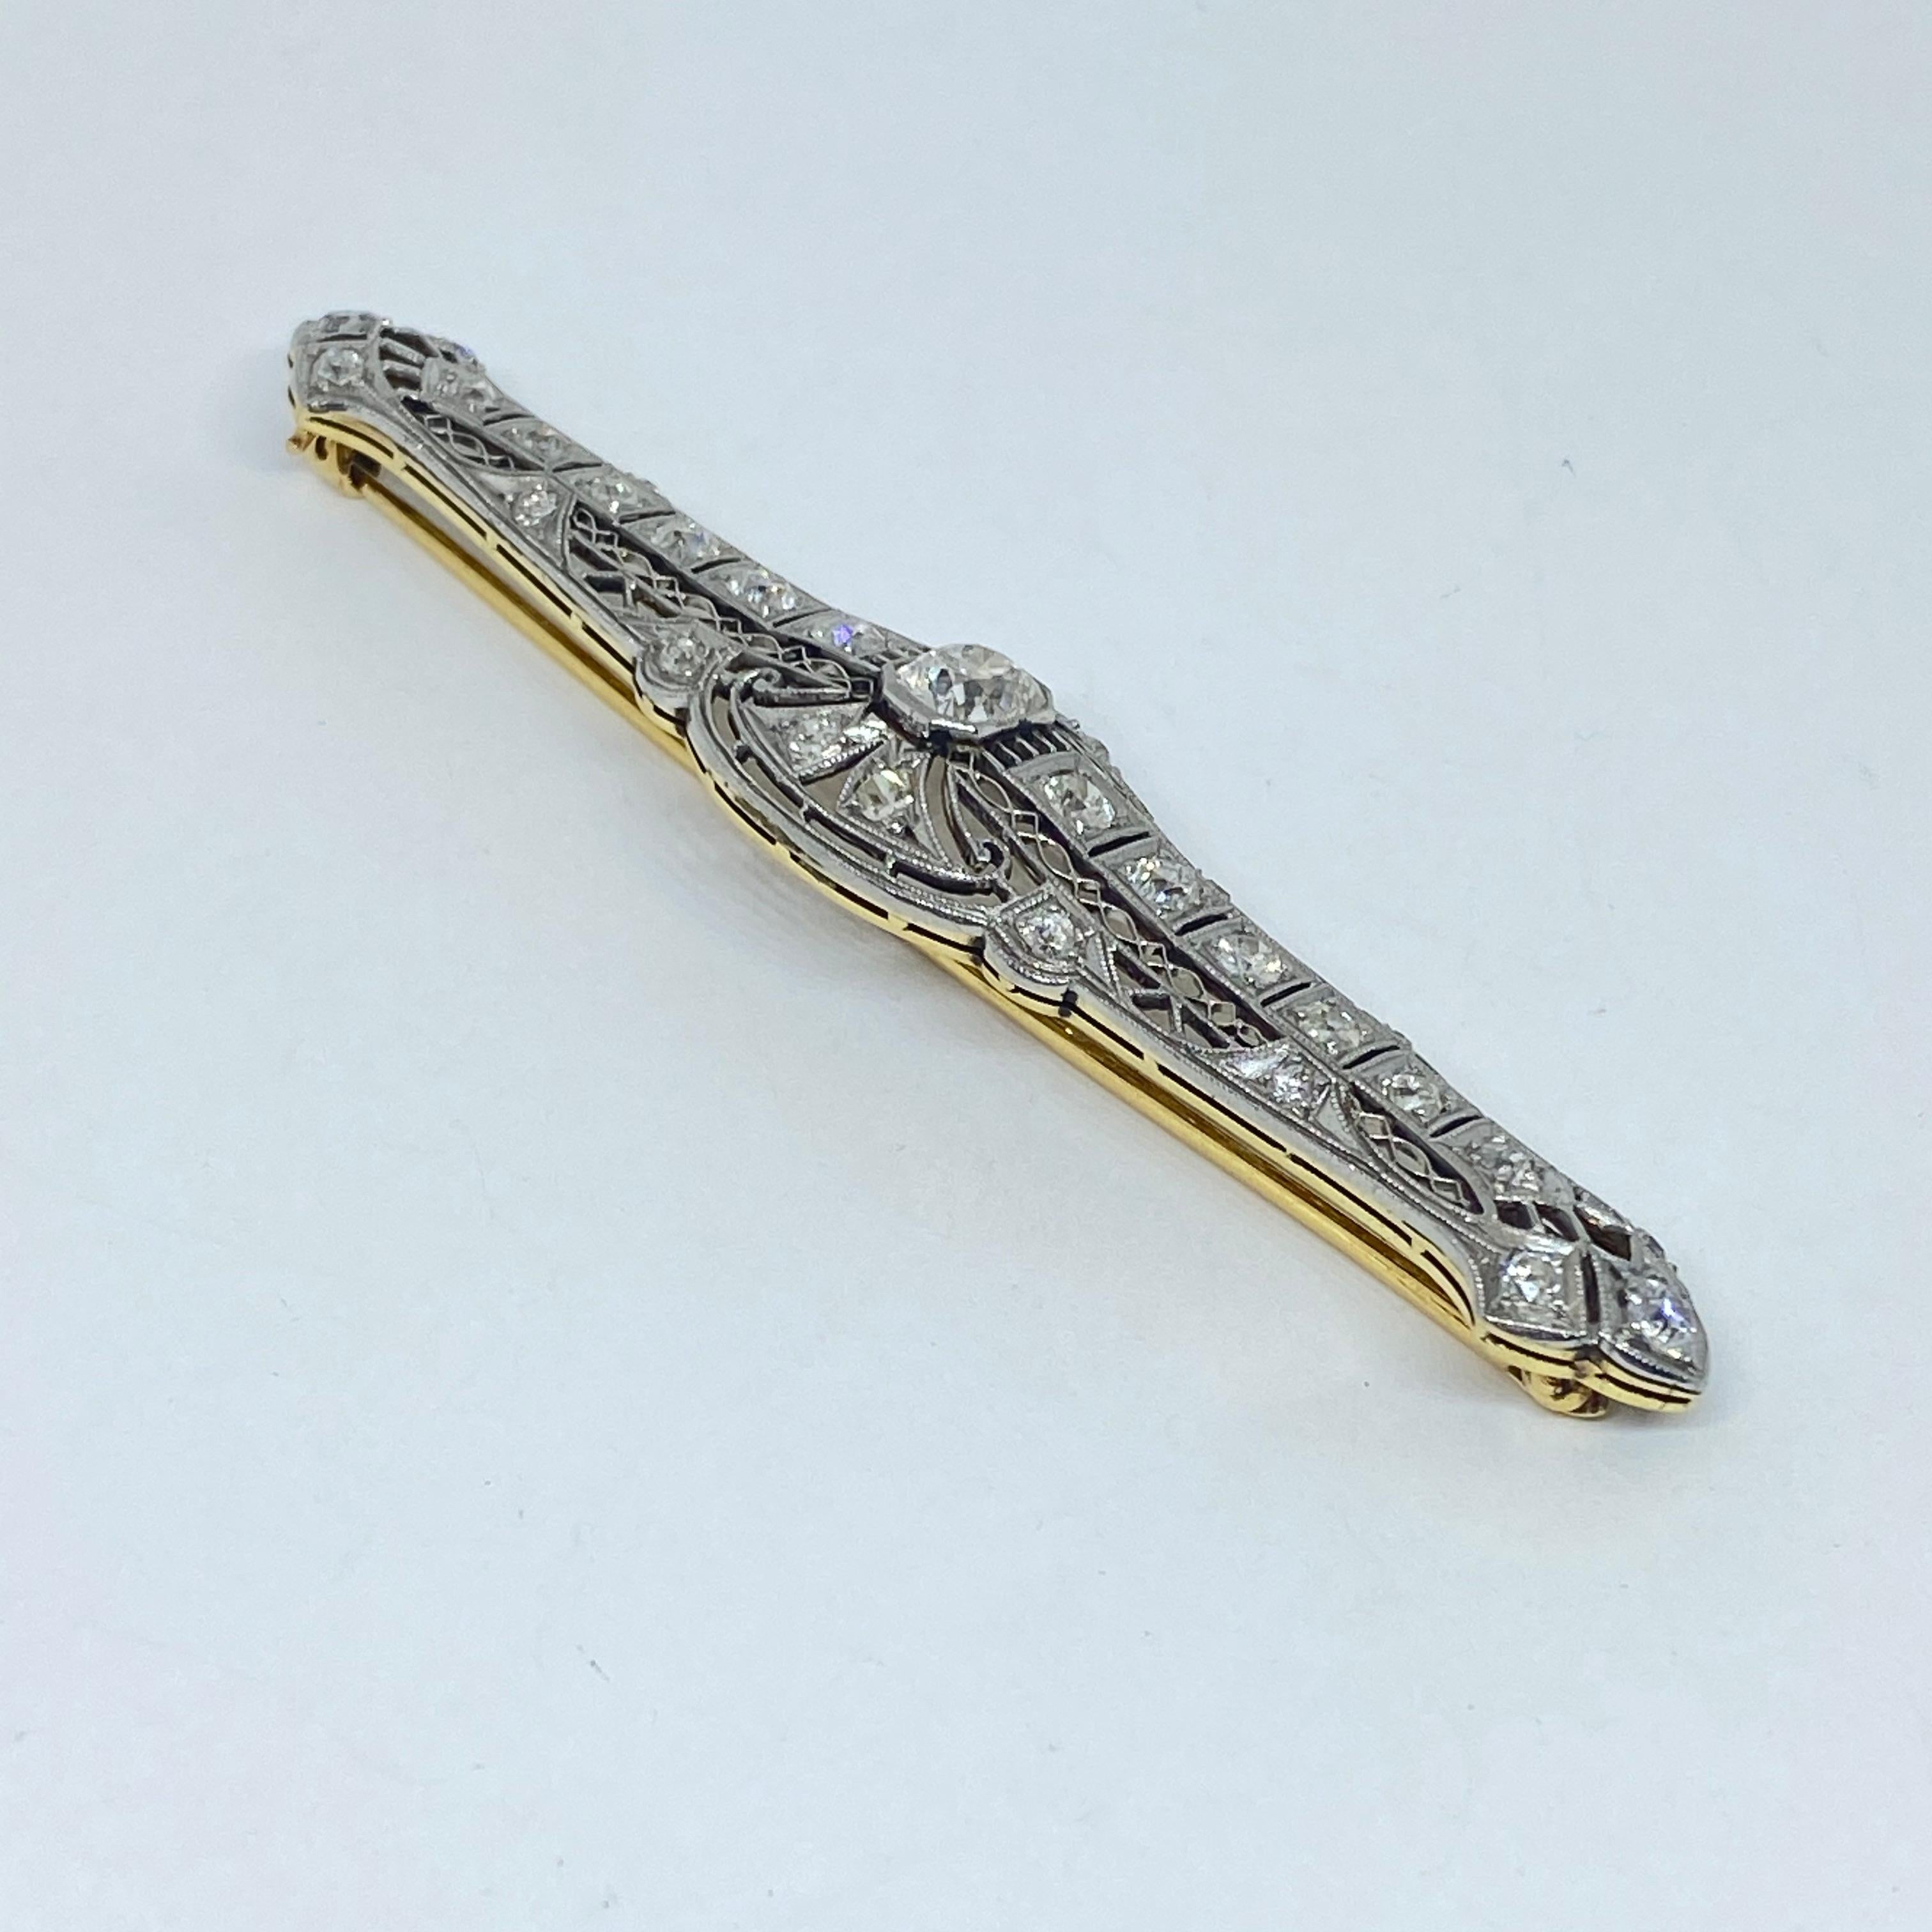 This brooch is fashioned from Platinum and 14K yellow gold. It is set with old European and old mine cut diamonds. The diamonds are set in platinum and the back plate and pin closure is 14K yellow gold. The center diamond is a modified old mine cut